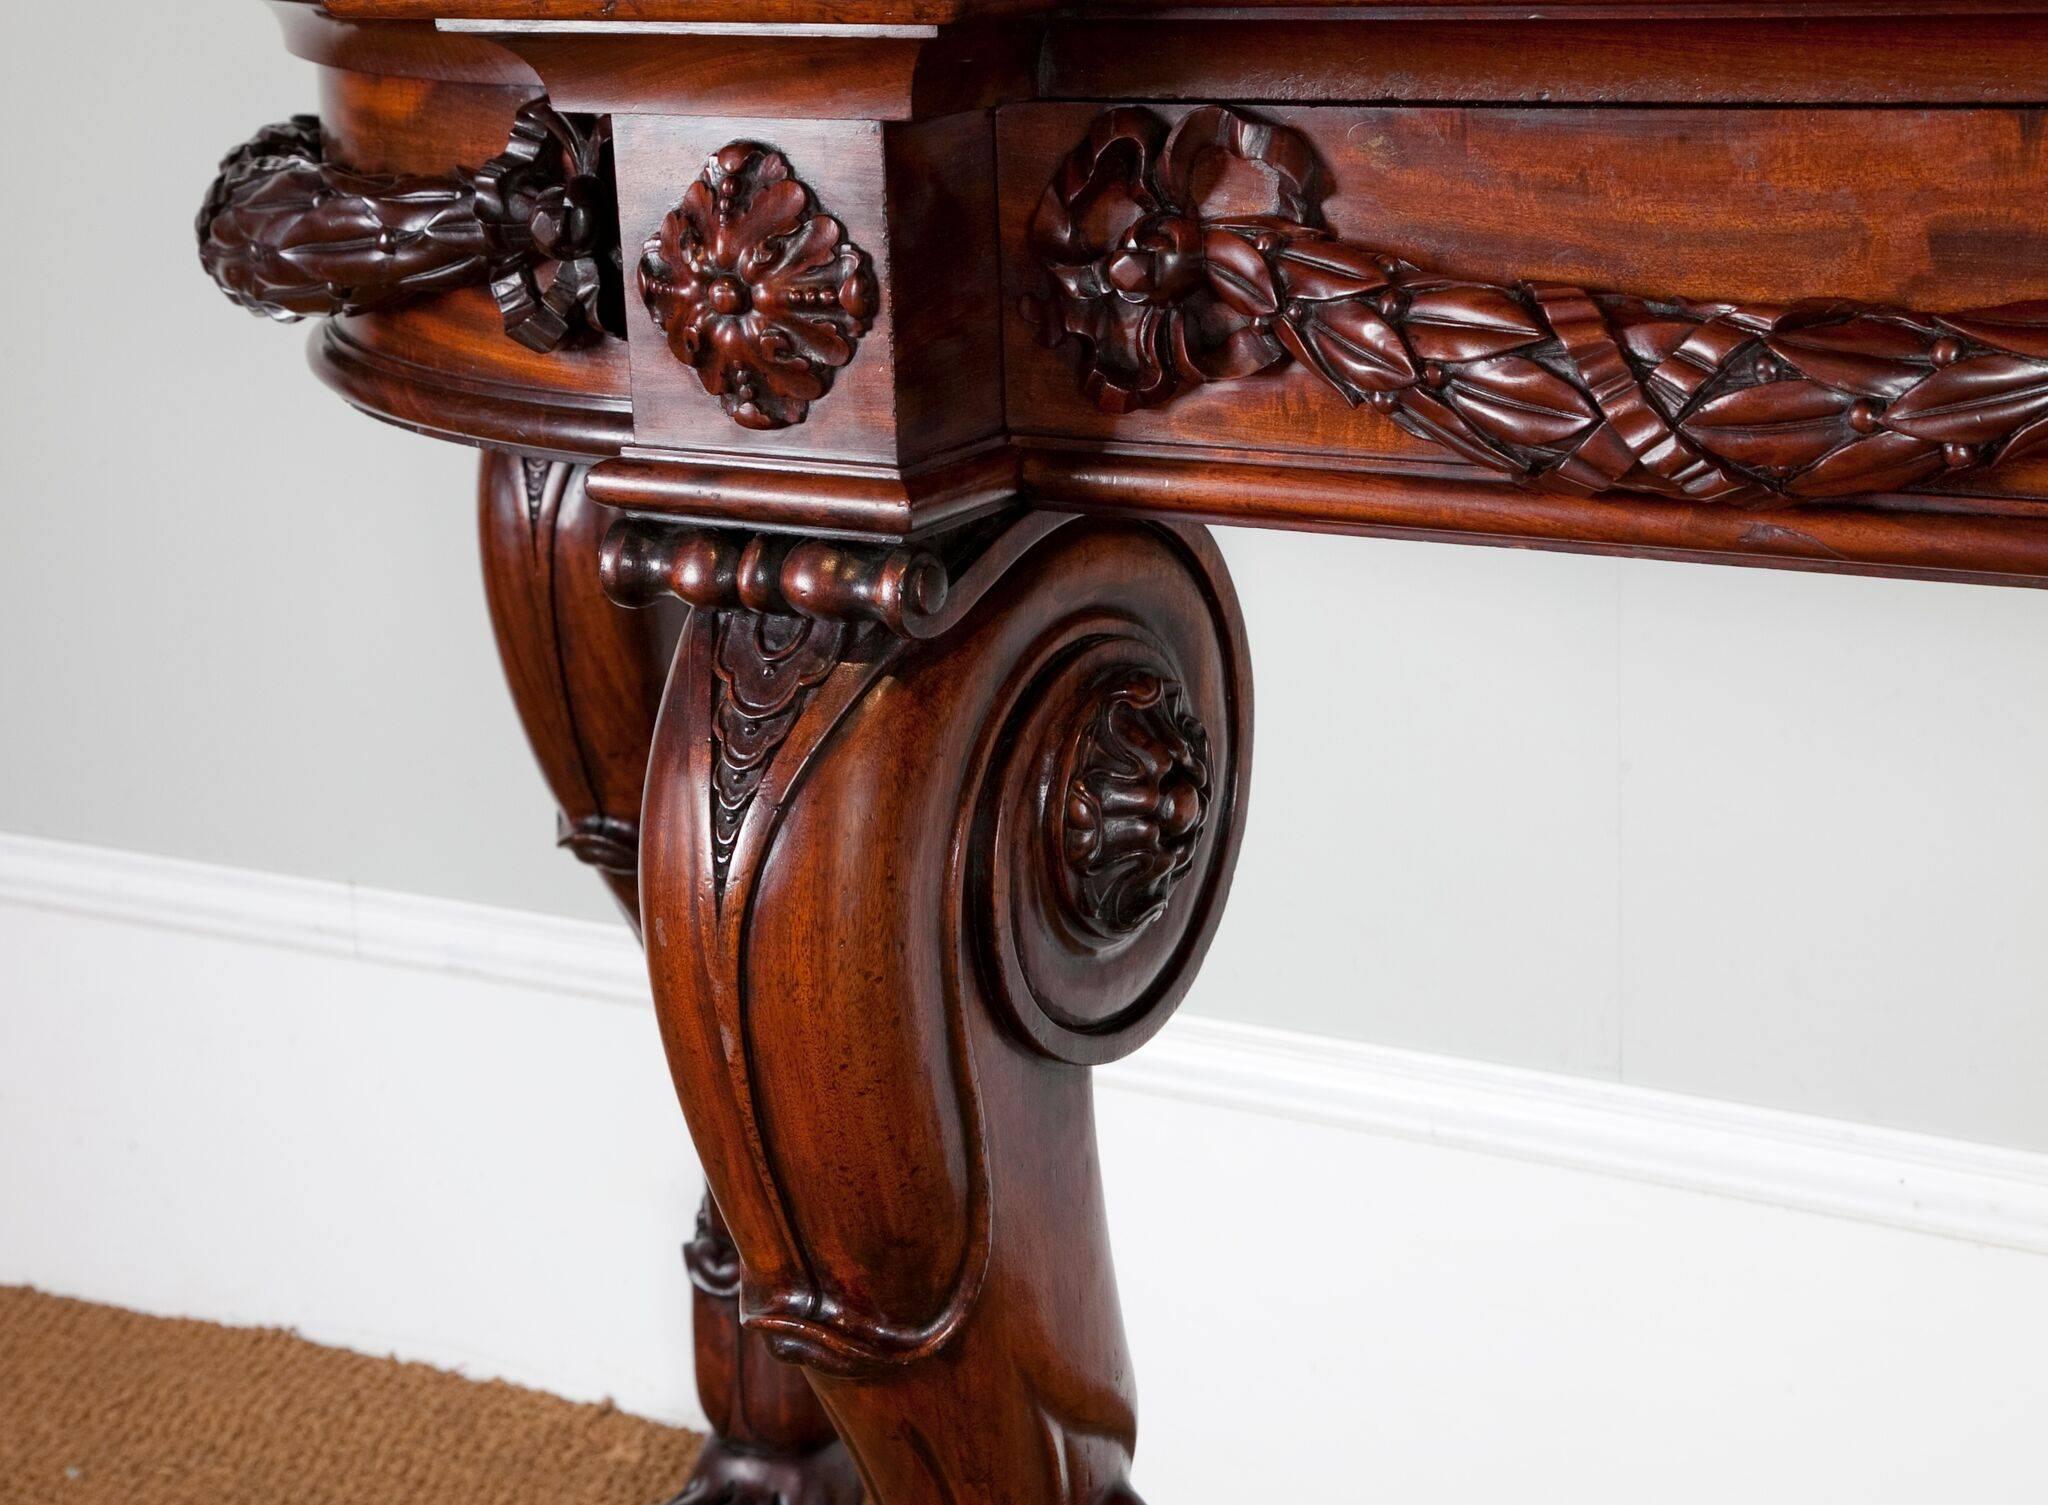 A robust George IV Irish console table. The rectangular mahogany top is enriched in color, with a moulded breakfront edge and bowed ends.
The top rests on a boldly carved frieze with laurel leaf swags, above four carved cabriole legs terminating in